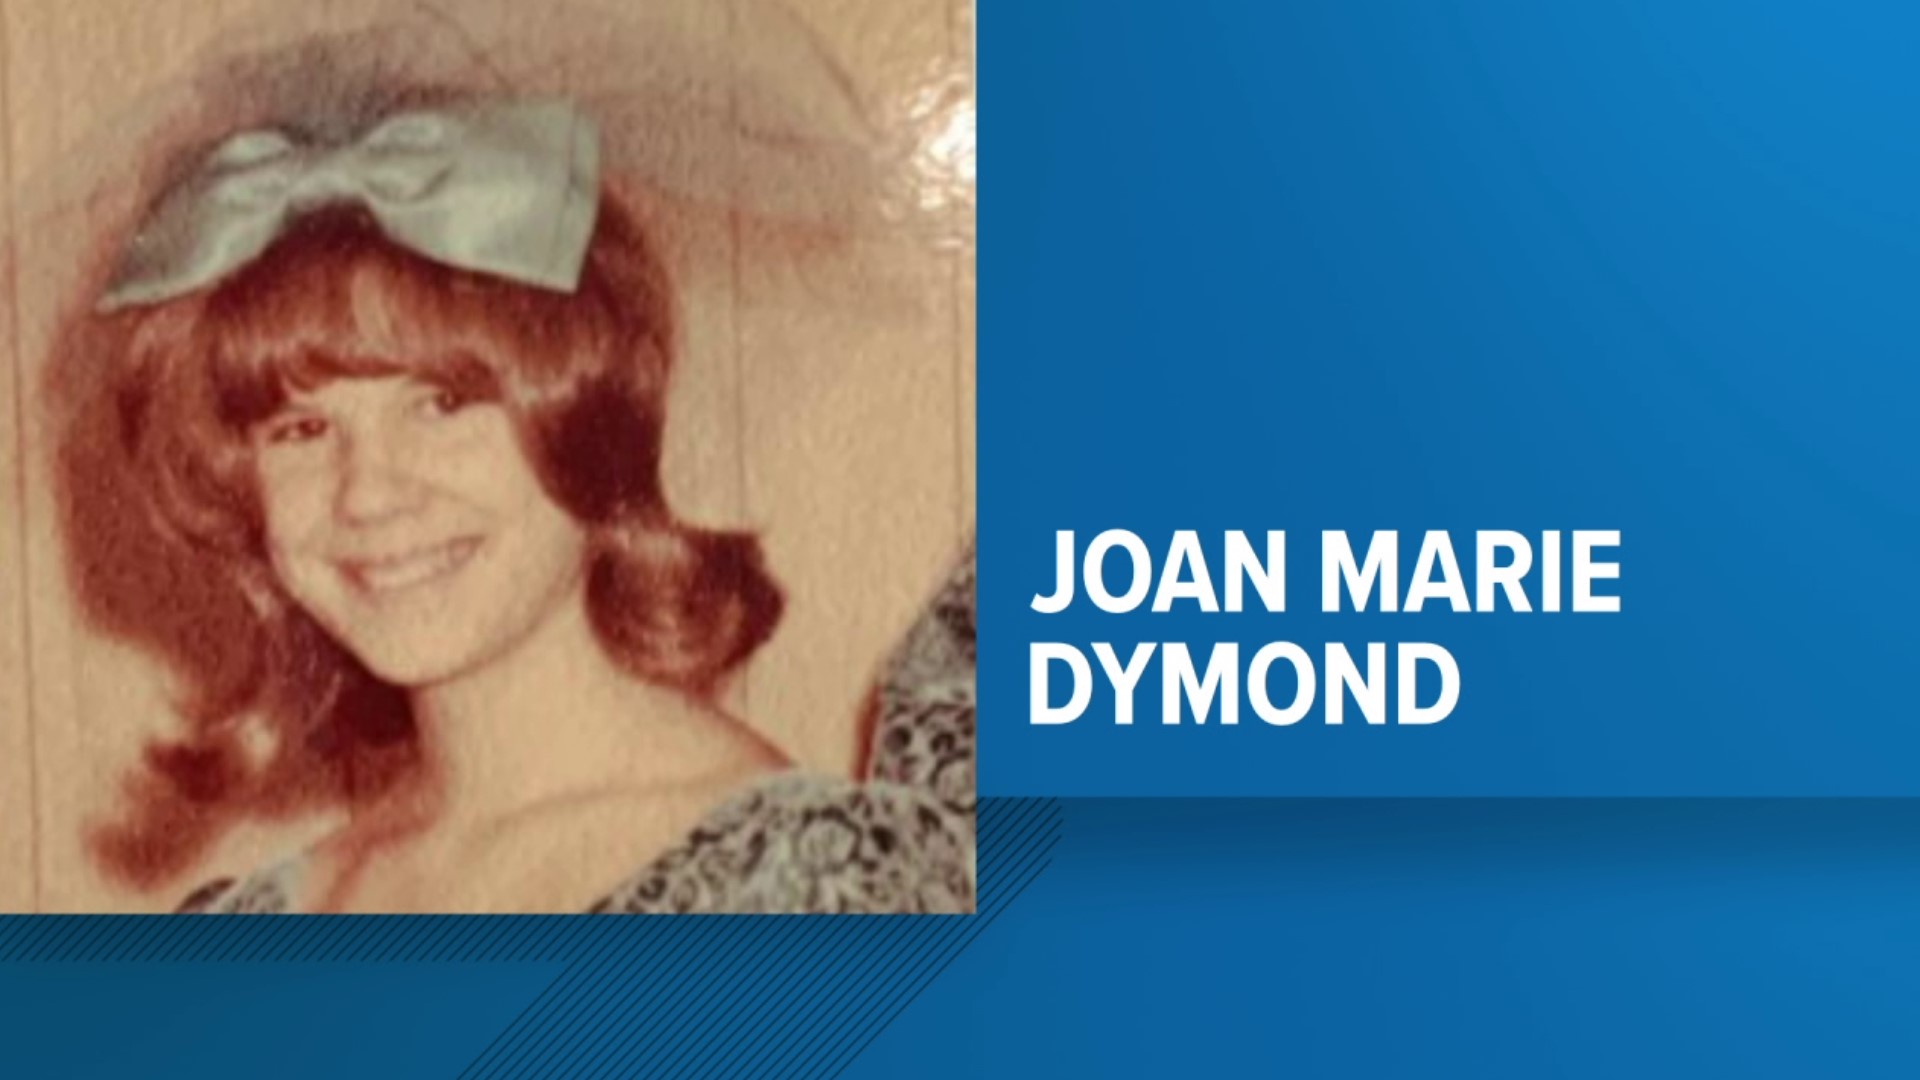 54 years ago, Joan Marie Dymond left her home and never returned. Now investigators say she was a victim of homicide.